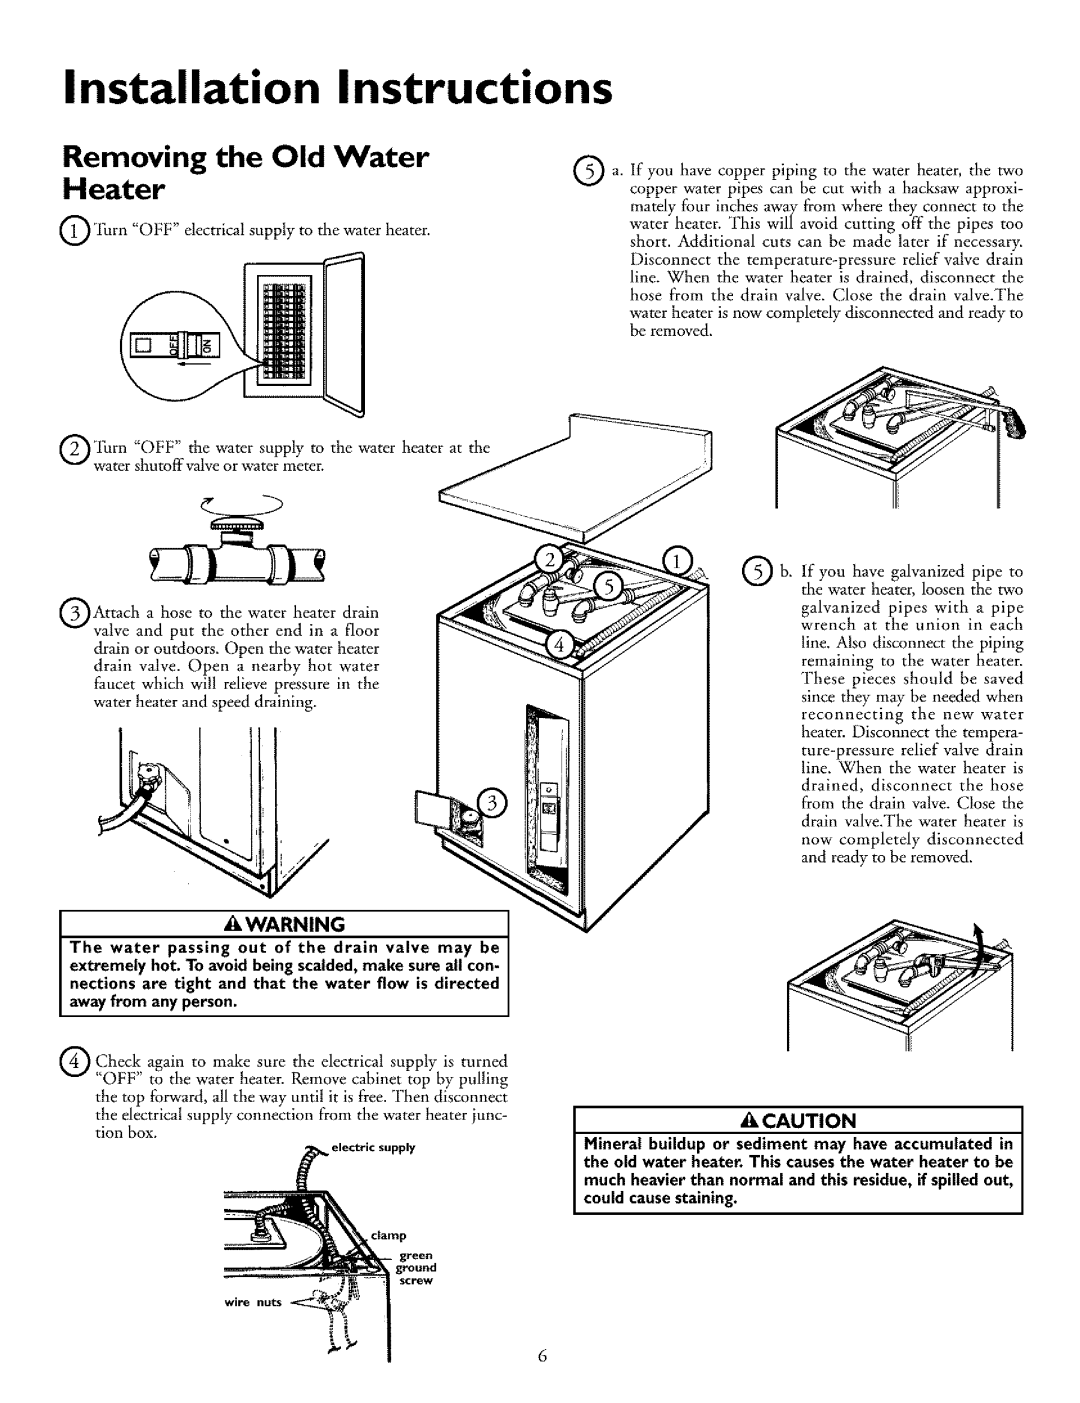 Kenmore 153.318131, 153.318031 Installation Instructions, Removing the Old Water Heater, Cautionj, awayfrom any person 